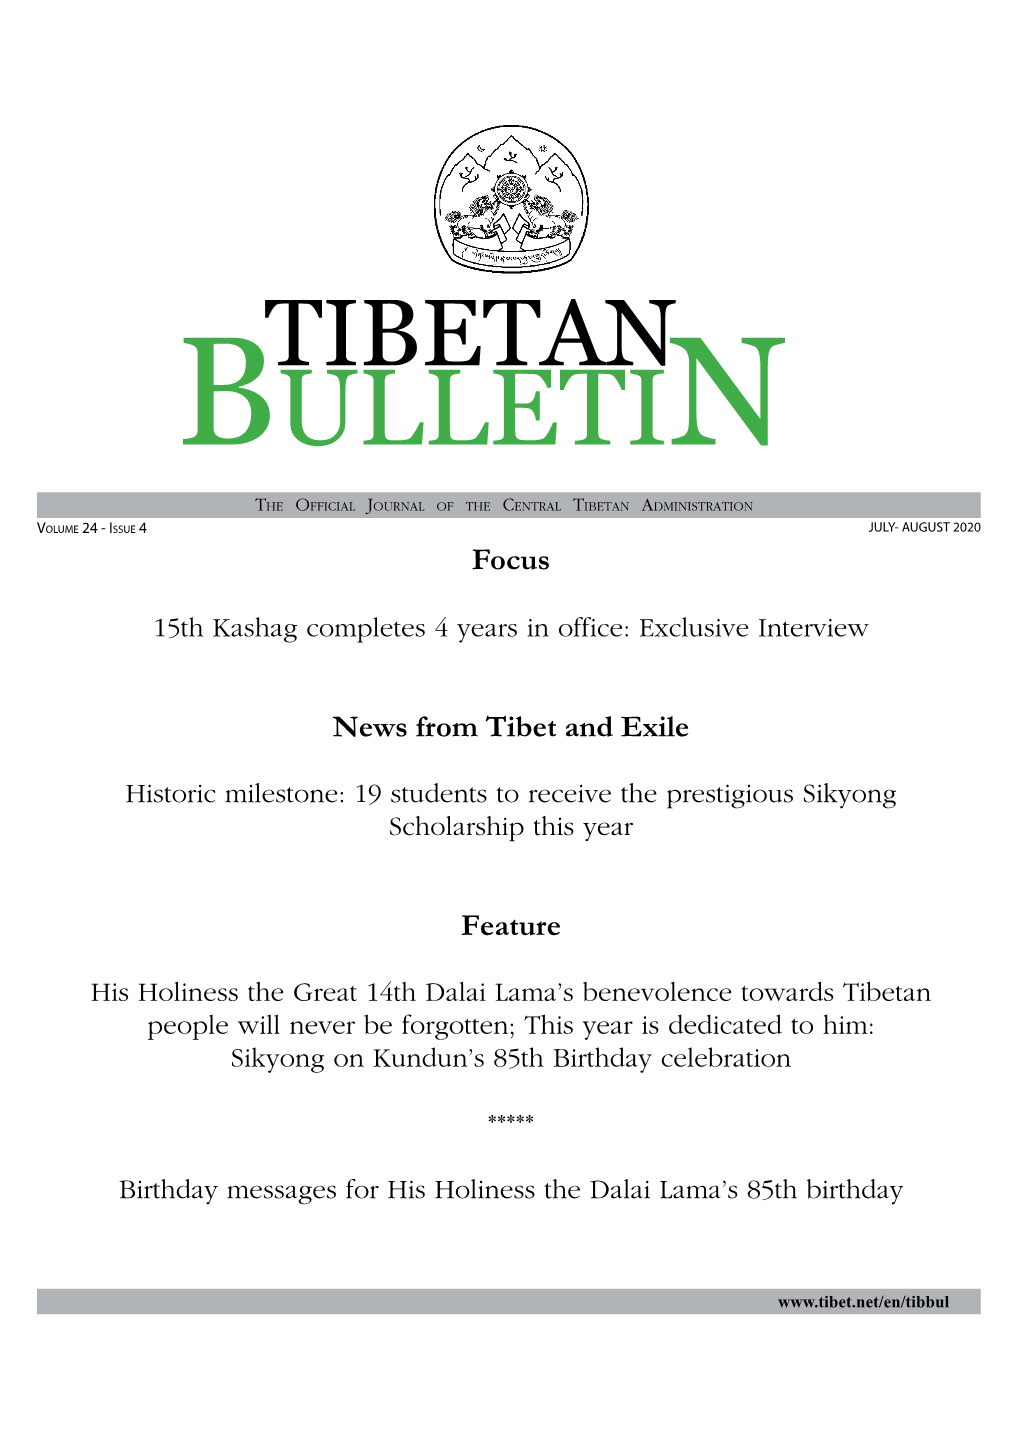 Bulletin the Official Journal of the Central Tibetan Administration Volume 24 - Issue 4 JULY- AUGUST 2020 Focus